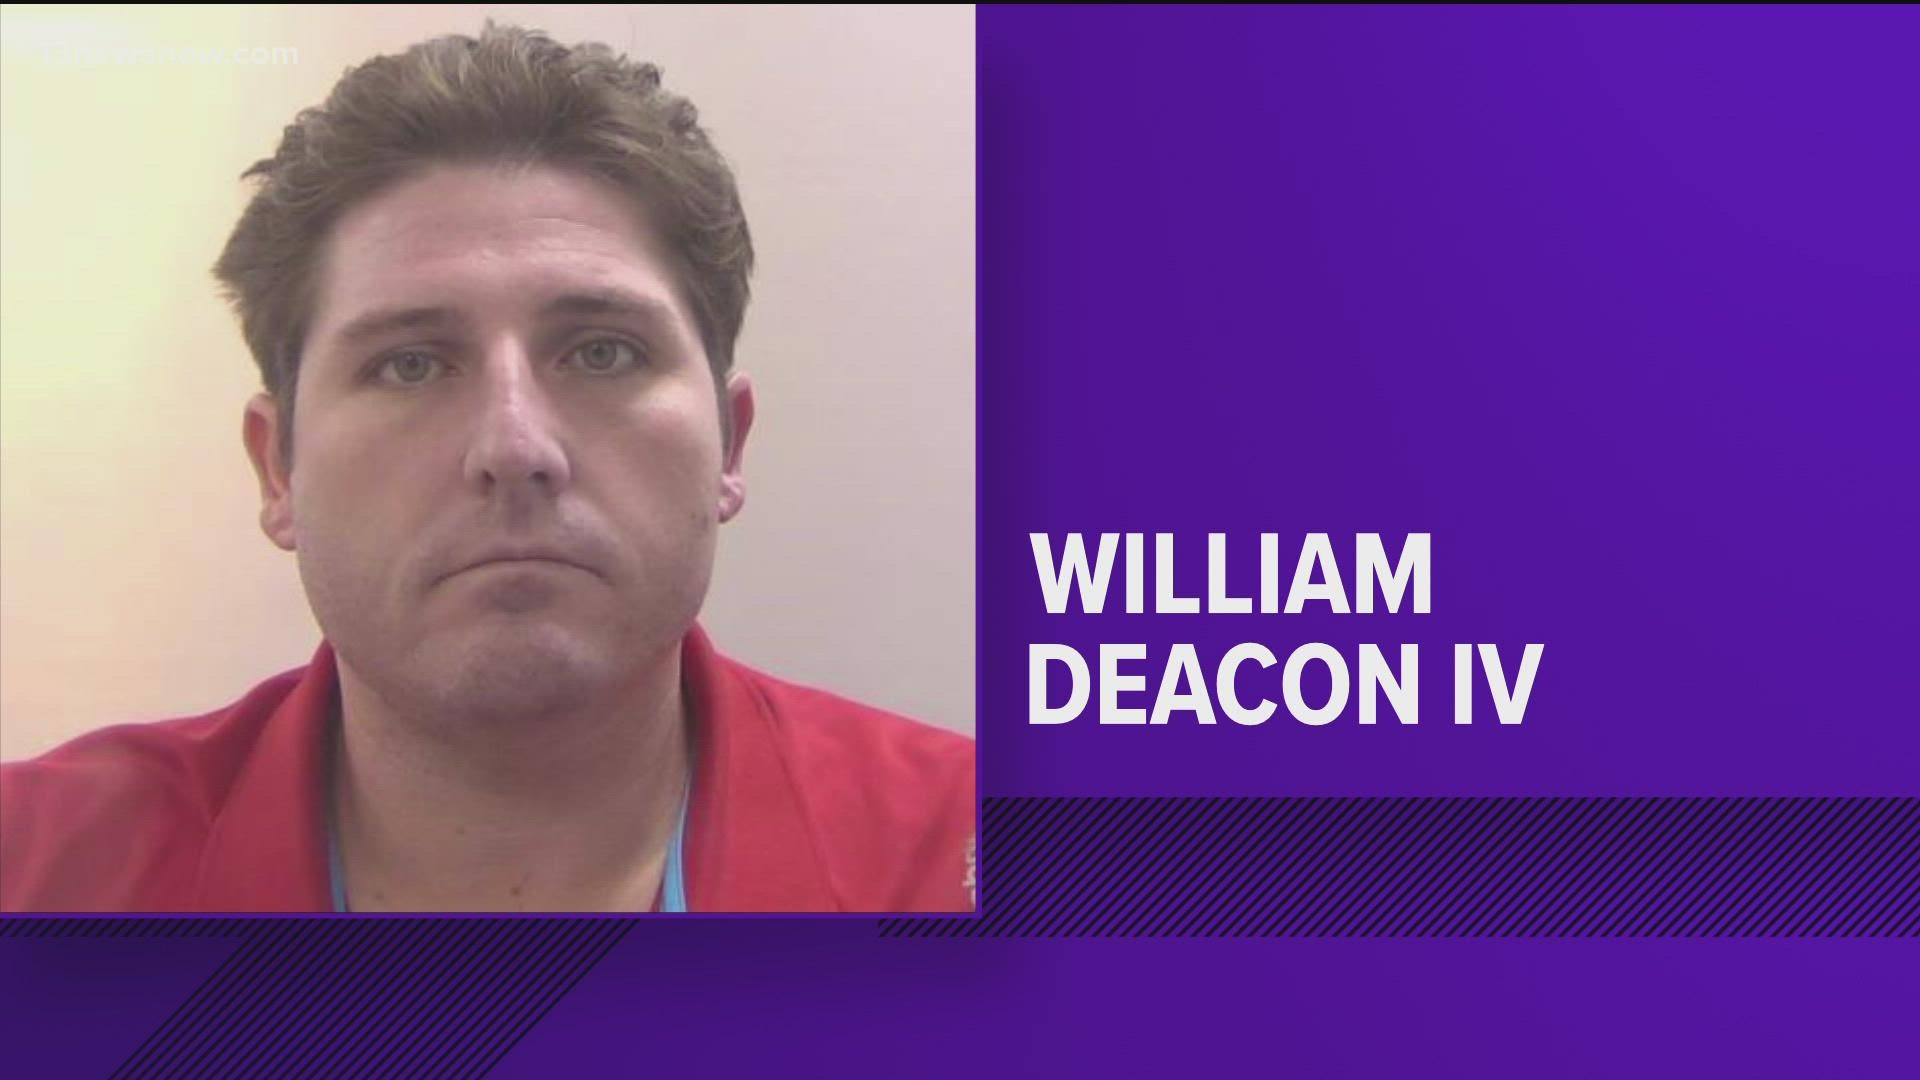 William Deacon IV is accused of communicating with children about sex.